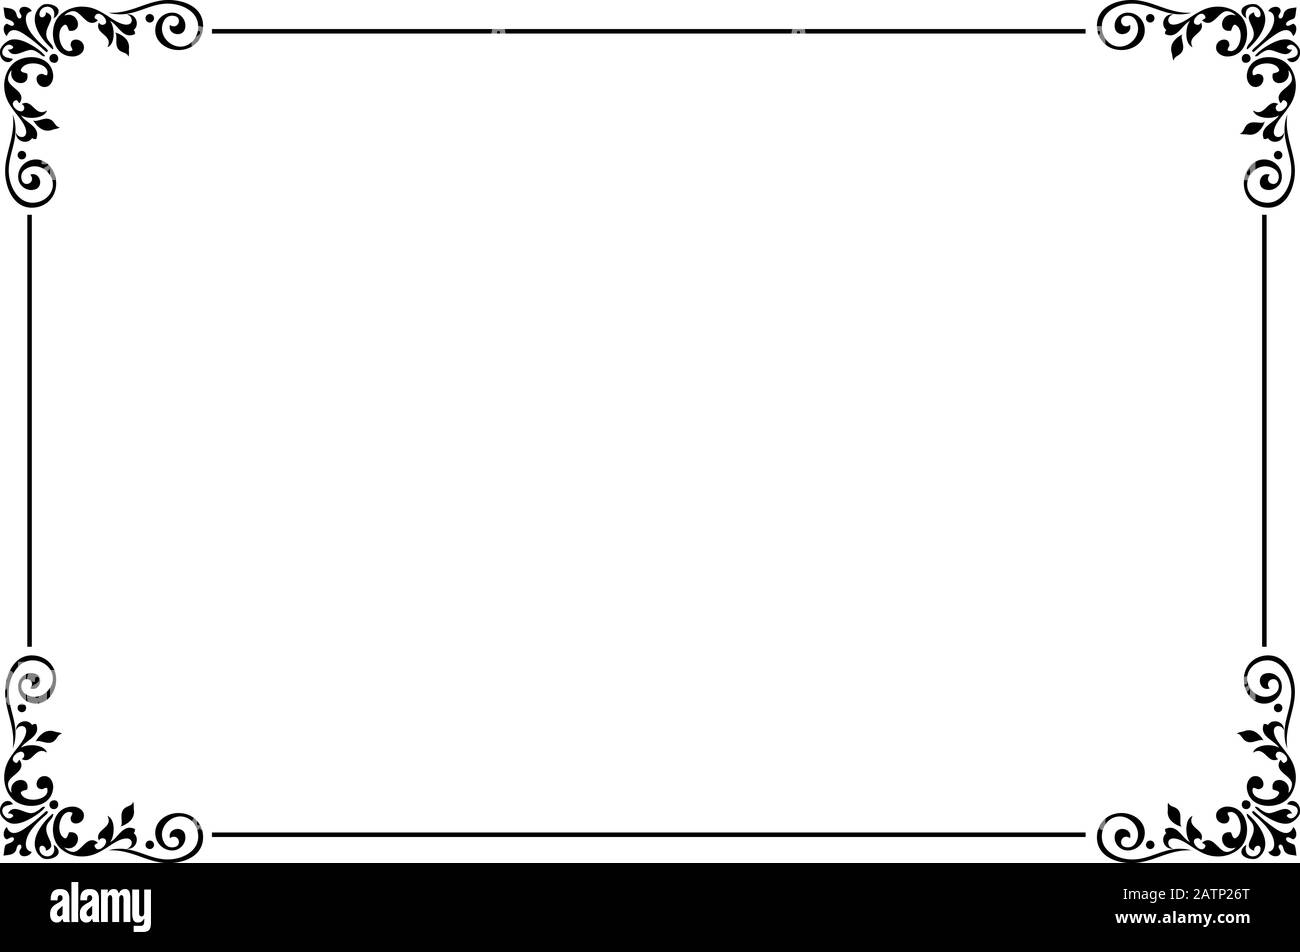 Scroll Border Black and White Page Border Stock Photo